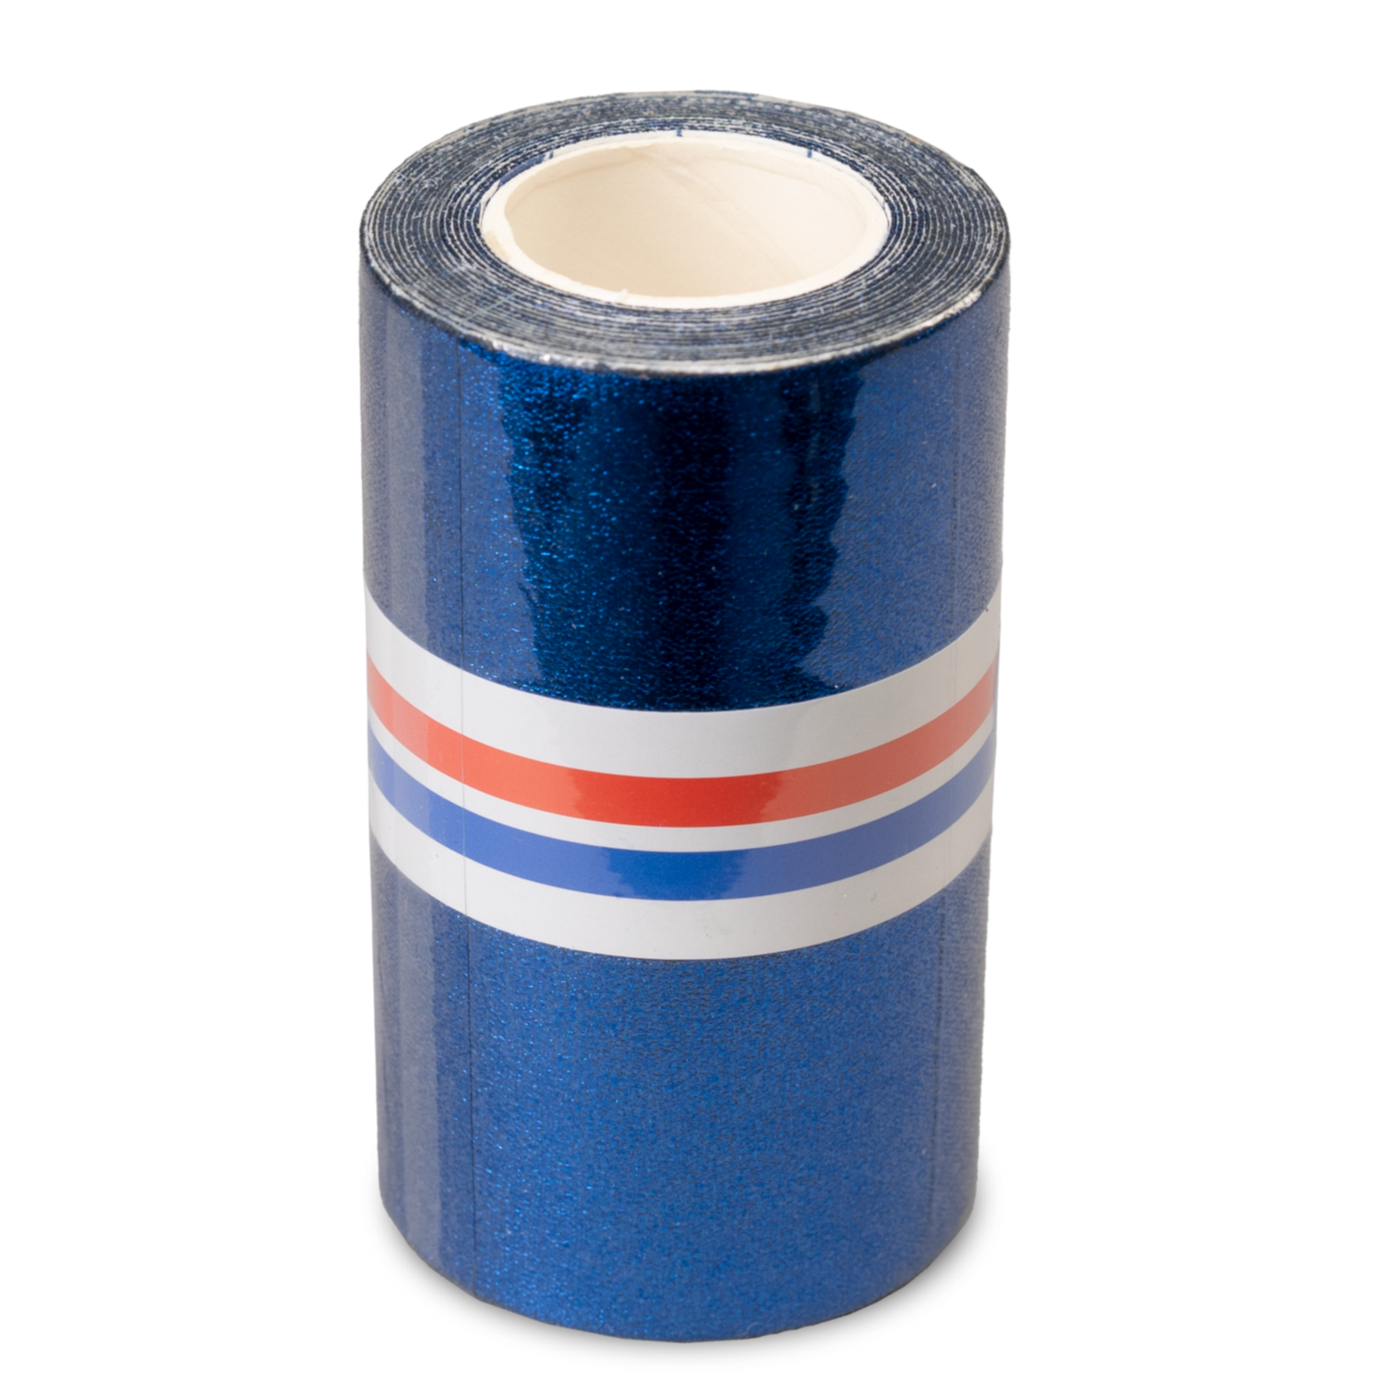 Ebonite Magic Wrap Tape - Blue with Red, White, and Blue stripes around the middle.